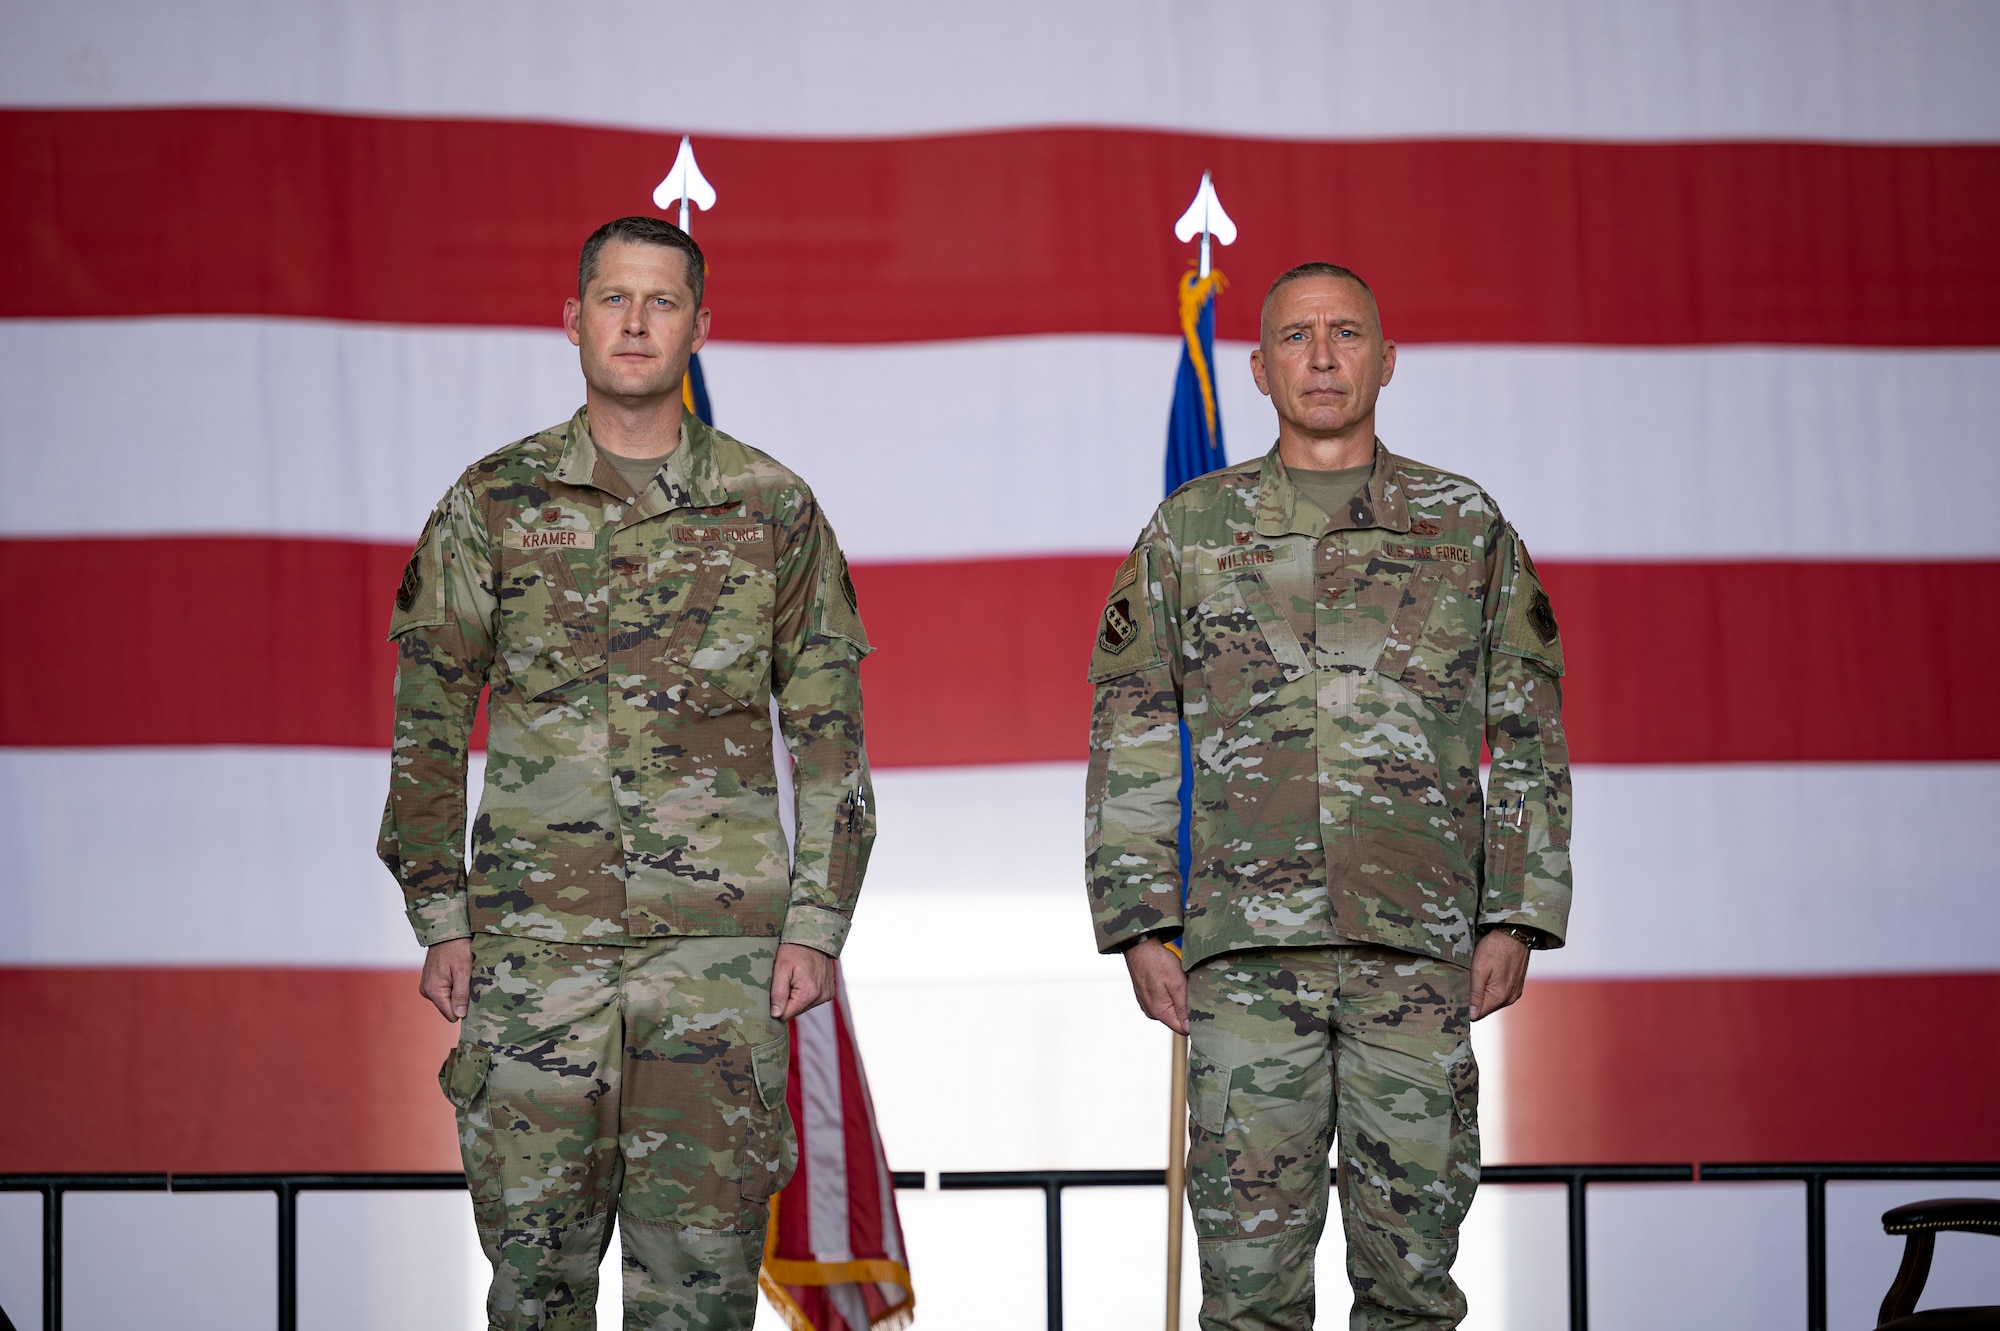 Col. Joseph Kramer, 7th Bomb Wing commander, stands beside Col. Brady Wilkins, outgoing 7th Maintenance Group commander, during a Change of Command ceremony at Dyess Air Force Base, Texas, May 13, 2022. Changes of command in the military are a tradition that formally represent the transfer of authority from one leader to another. (U.S. Air Force photo by Senior Airman Josiah Brown)